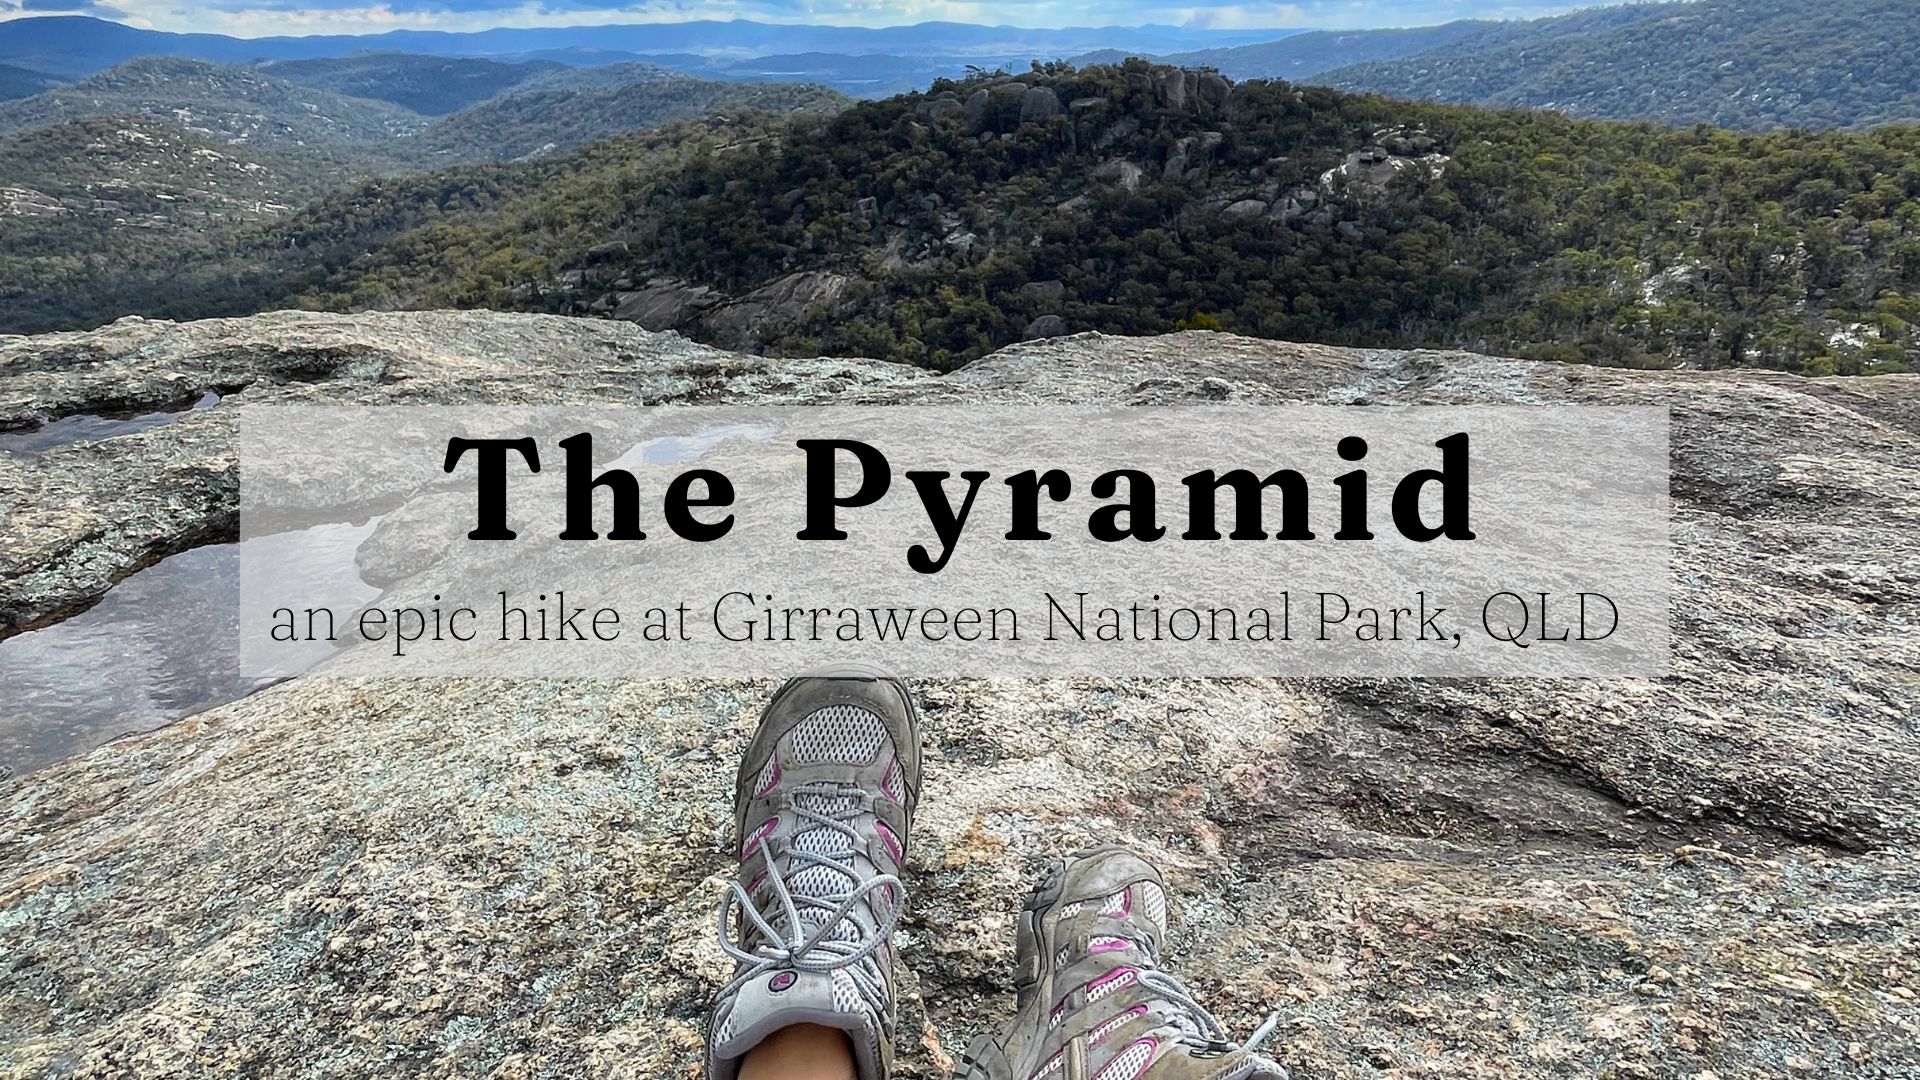 Guide to hiking the Pyramid at Girraween National Park Everything you need to know about hiking the pyramid girraween The pyramid girraween cover